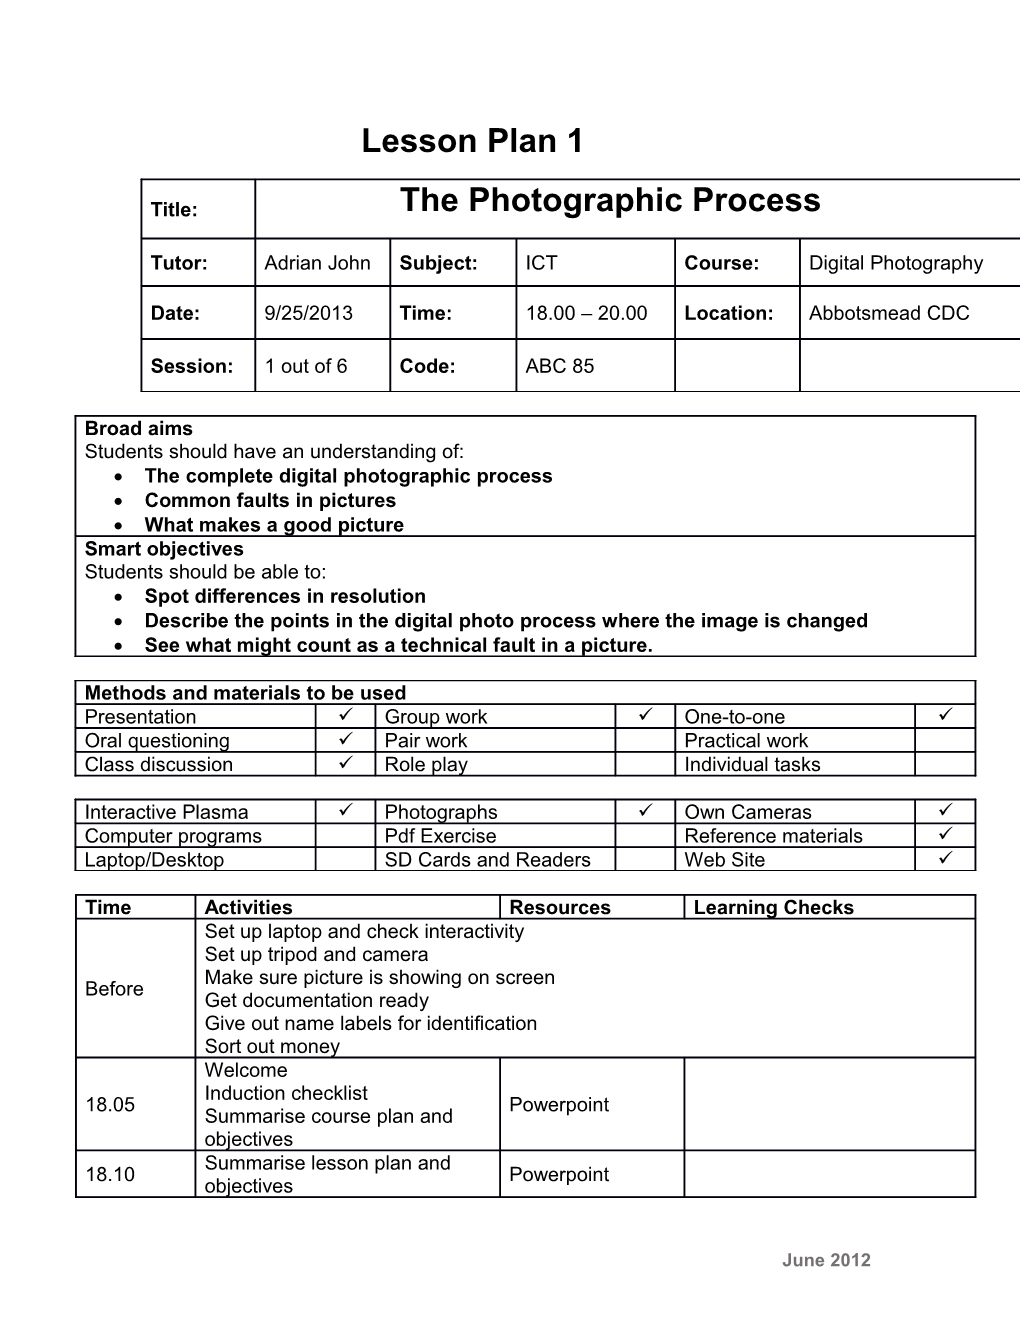 The Photographic Process